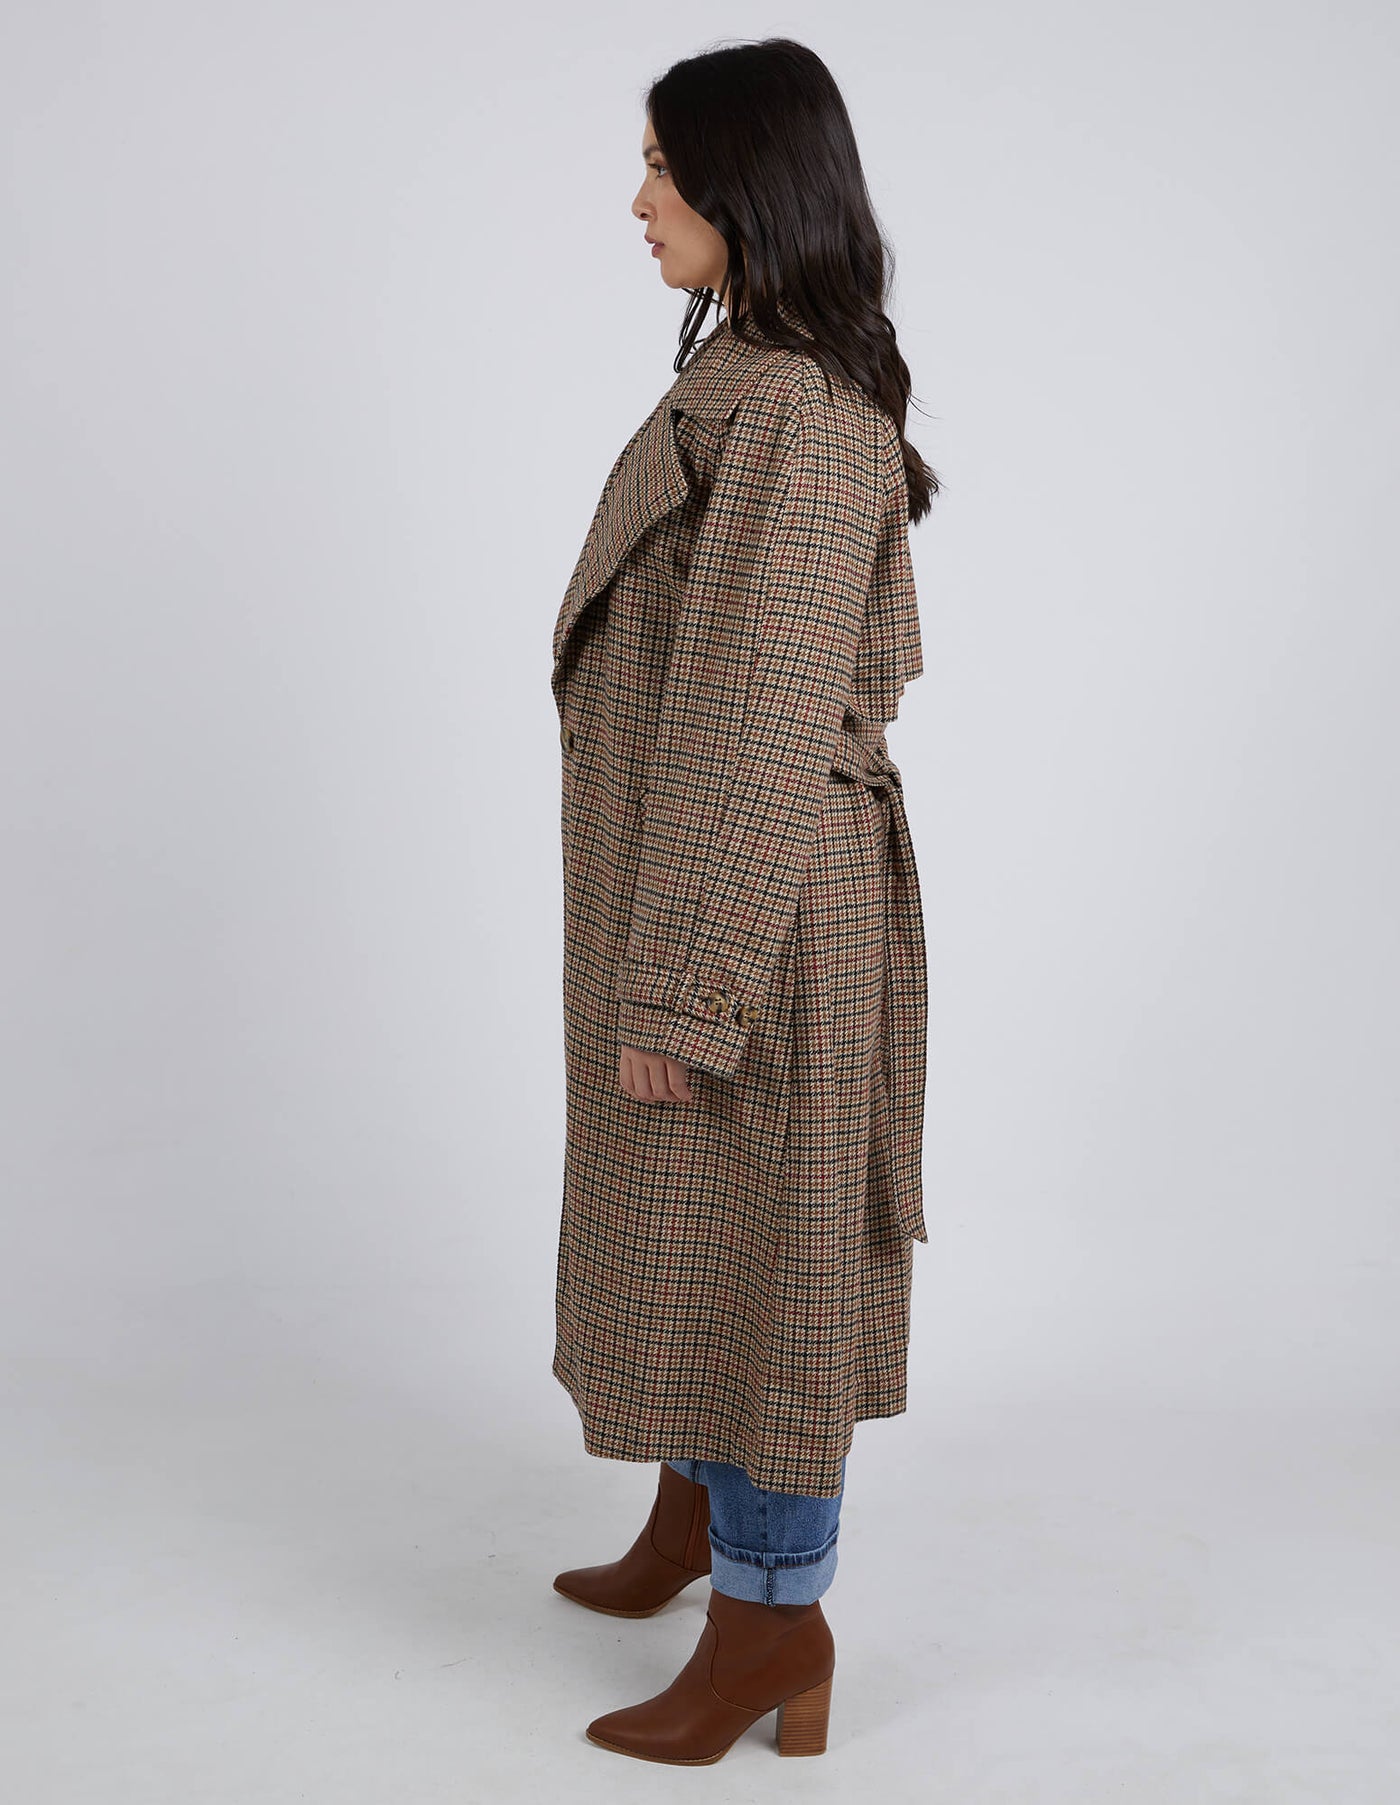 Joie Trench - Tan